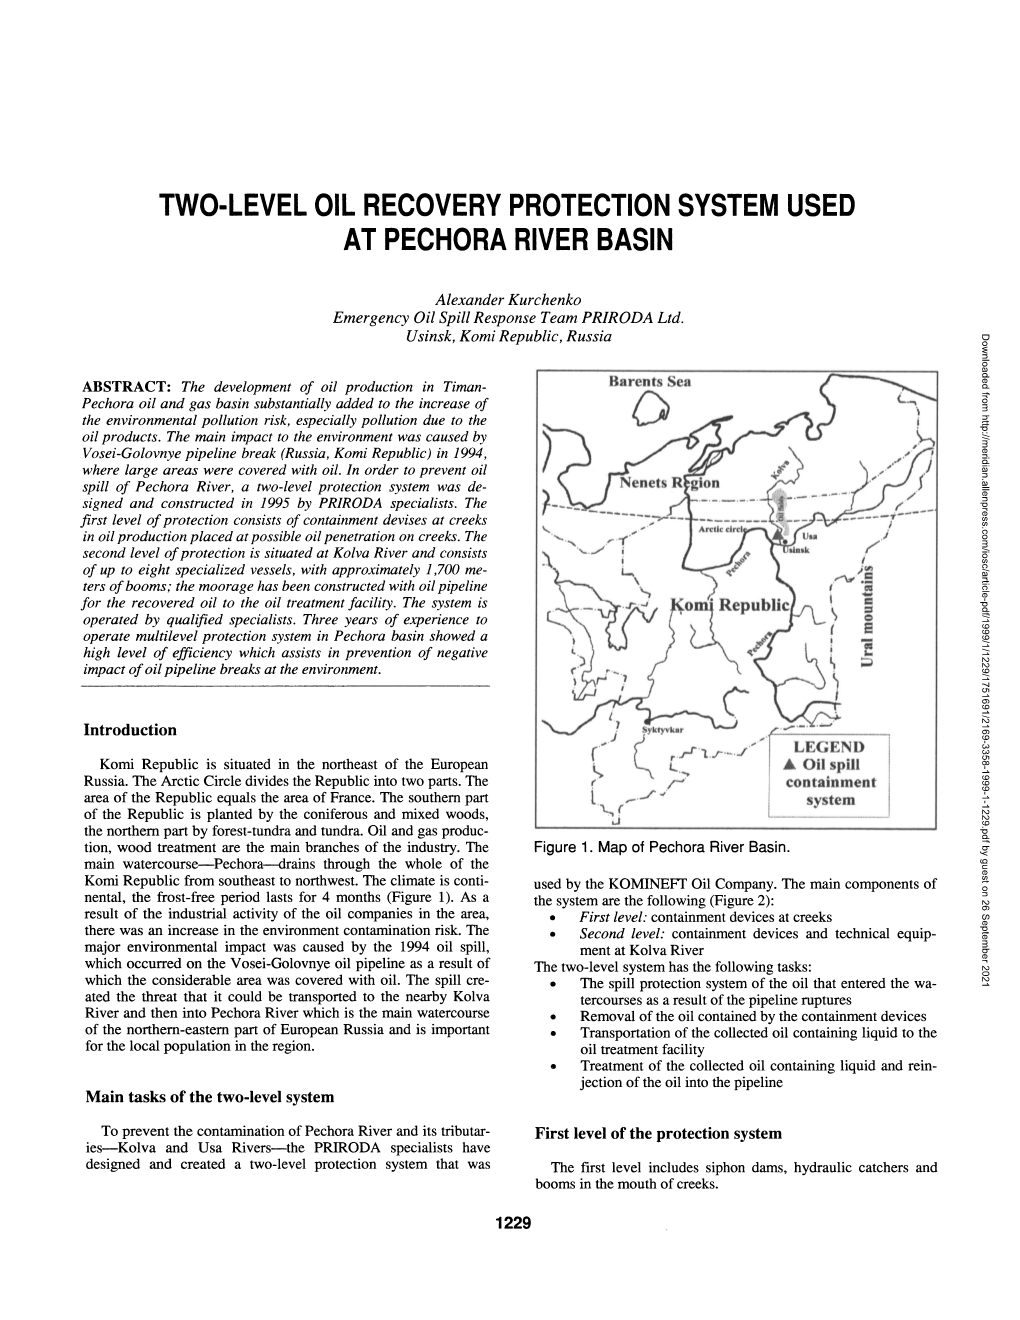 Two-Level Oil Recovery Protection System Used at Pechora River Basin